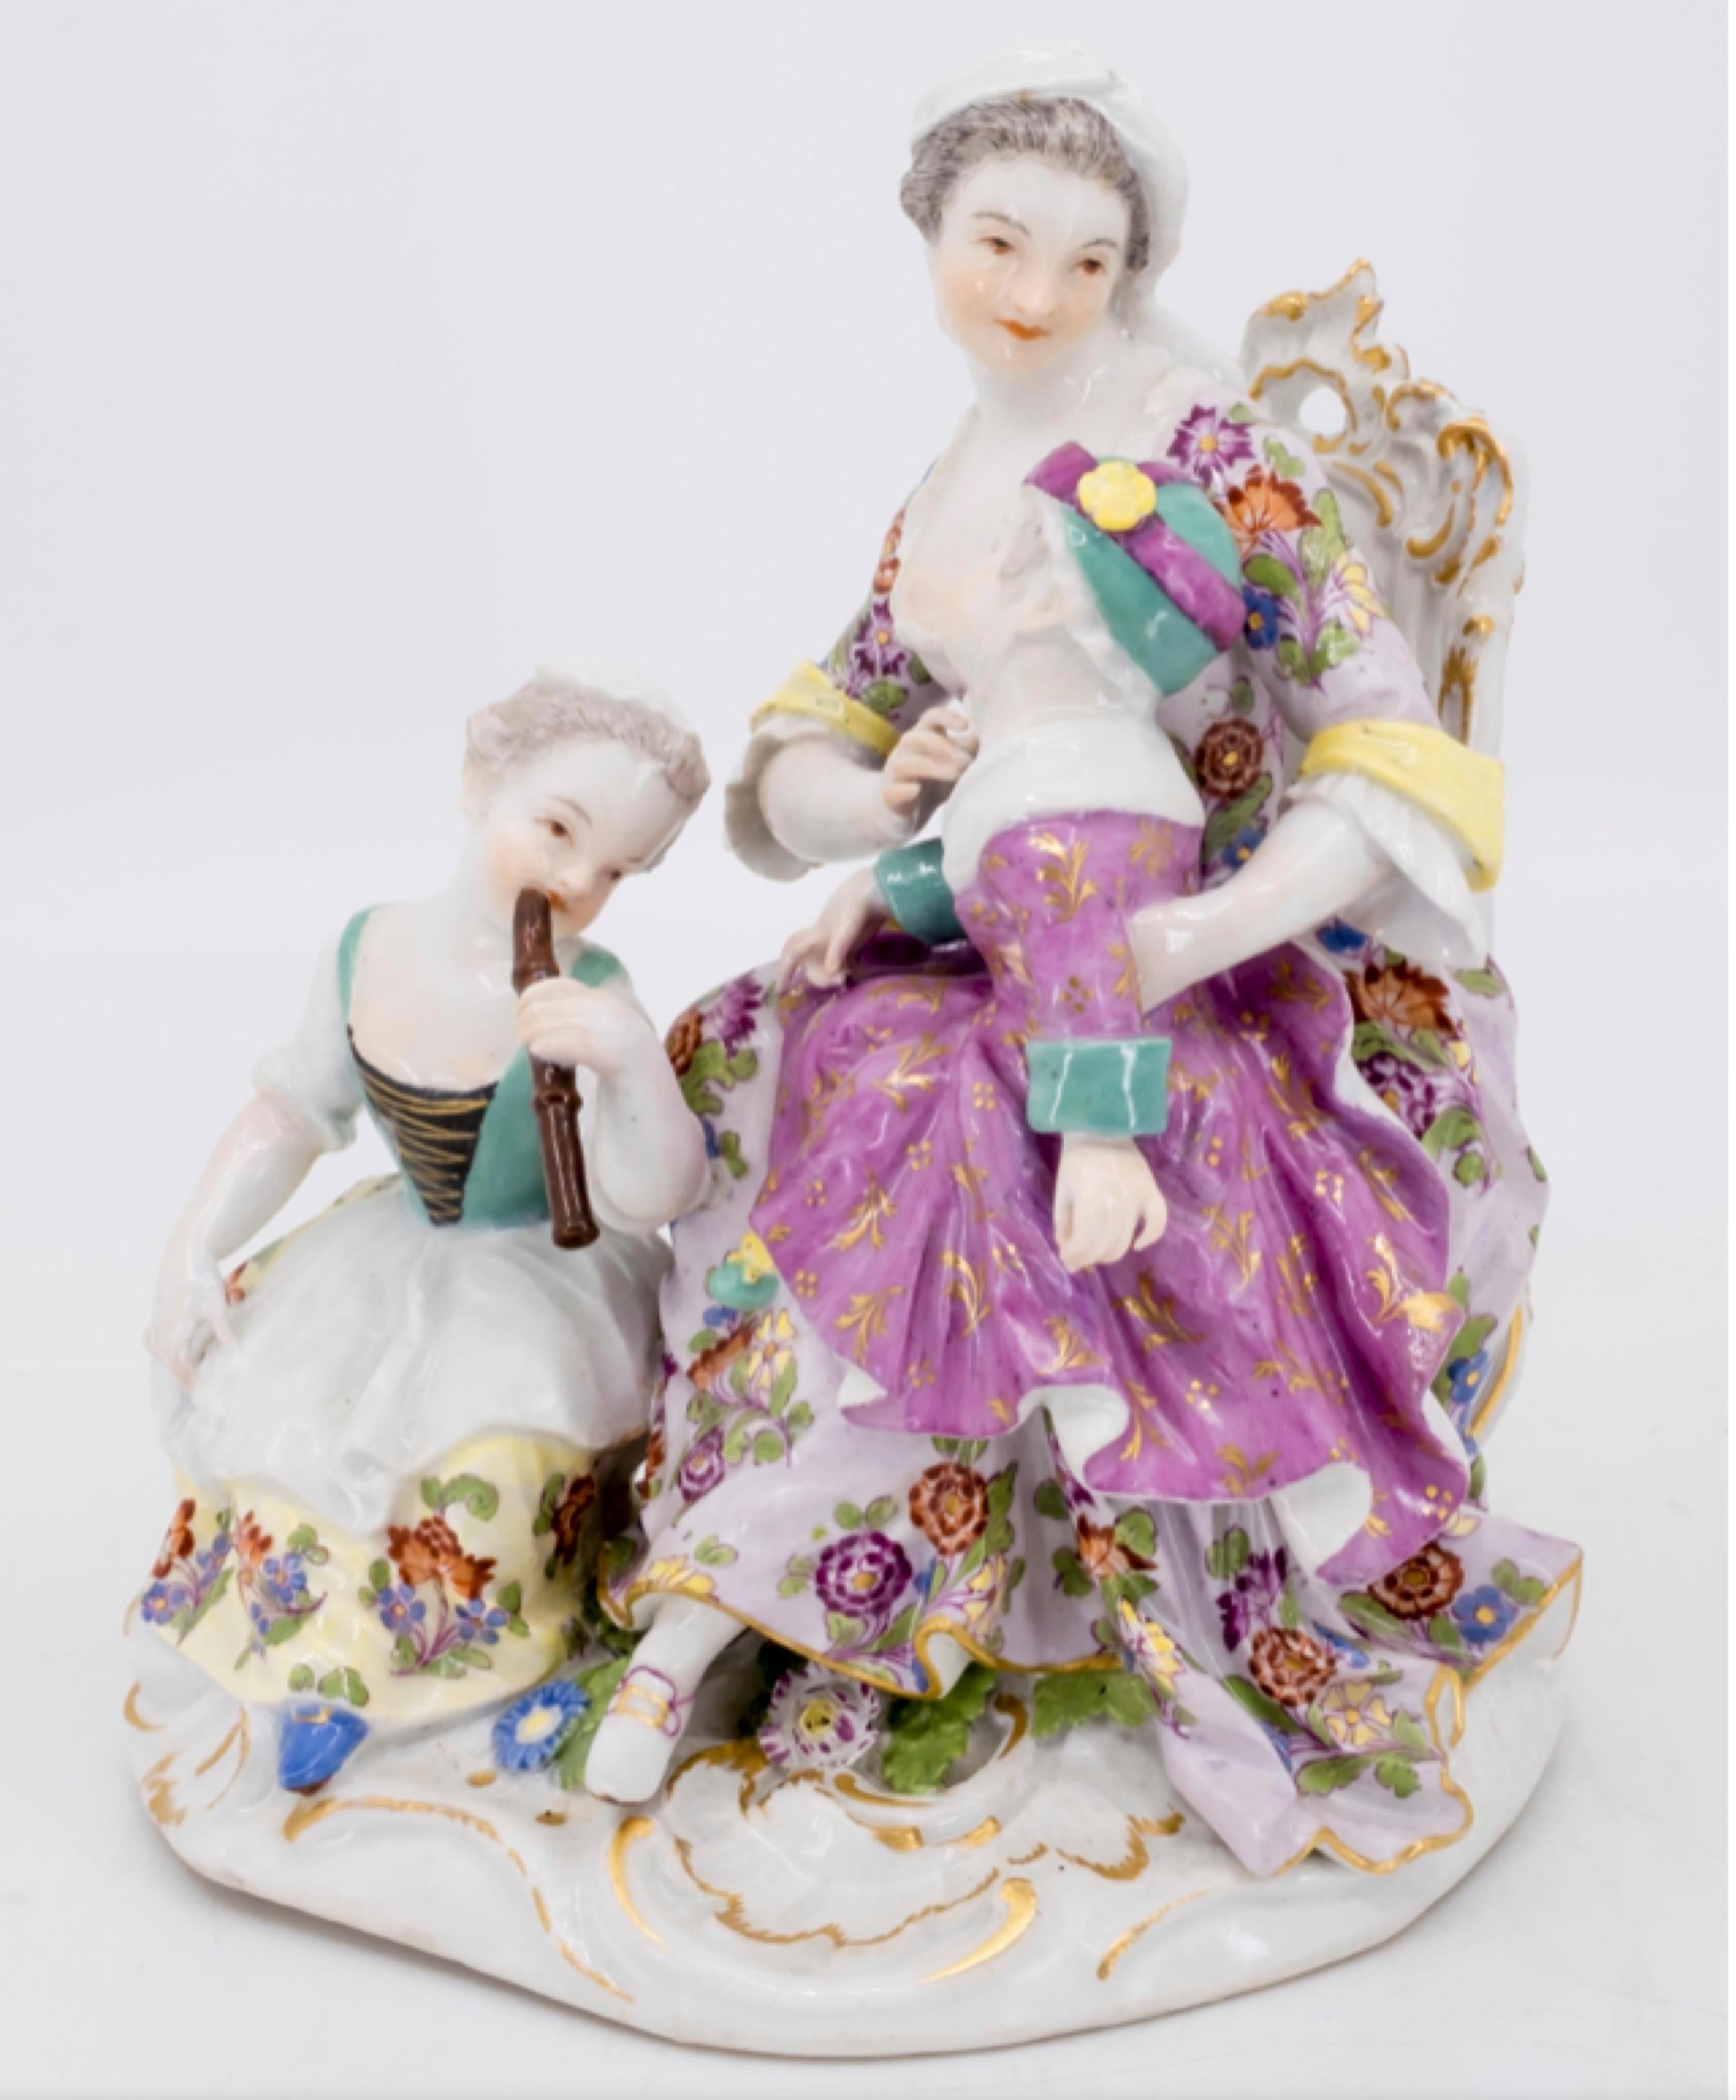 A figurine of a mother and two children, the girl playing the flute
German, Meissen, mid-18th century, marked for Meissen,
porcelain, Germany with double crossed swords in under-glaze blue




